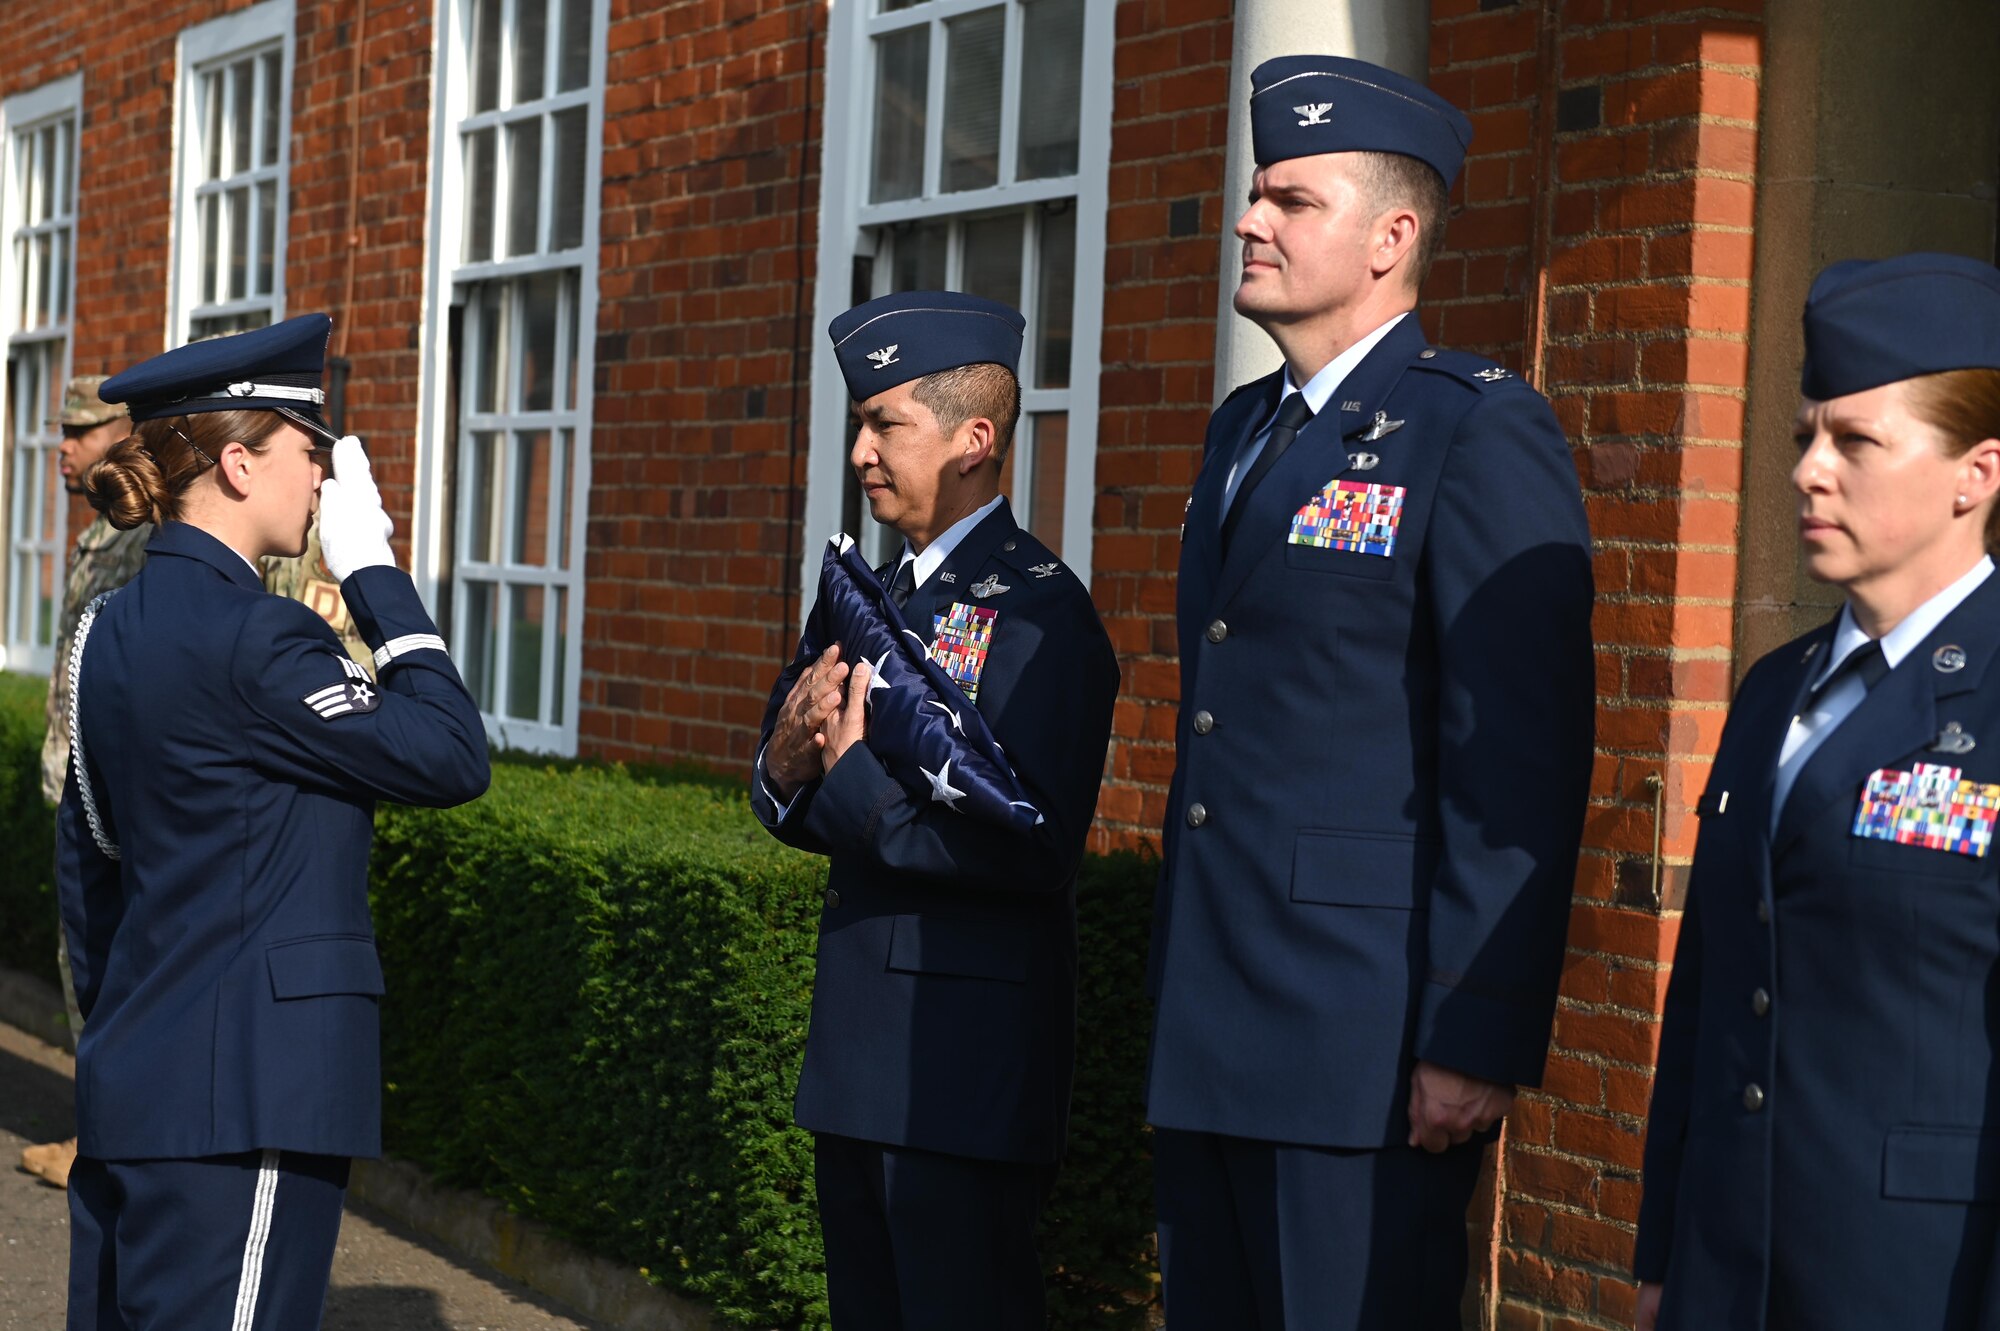 A member of the base honor guard team salutes U.S. Air Force Col. Troy Pananon, 100th Air Refueling Wing commander, after presenting him with a flag at Royal Air Force Mildenhall, England, July 19, 2021. The flag was given to Pananon to signify his last day of command as the 100th ARW commander. (U.S. Air Force photo by Staff Sgt. Matthew J. Wisher)